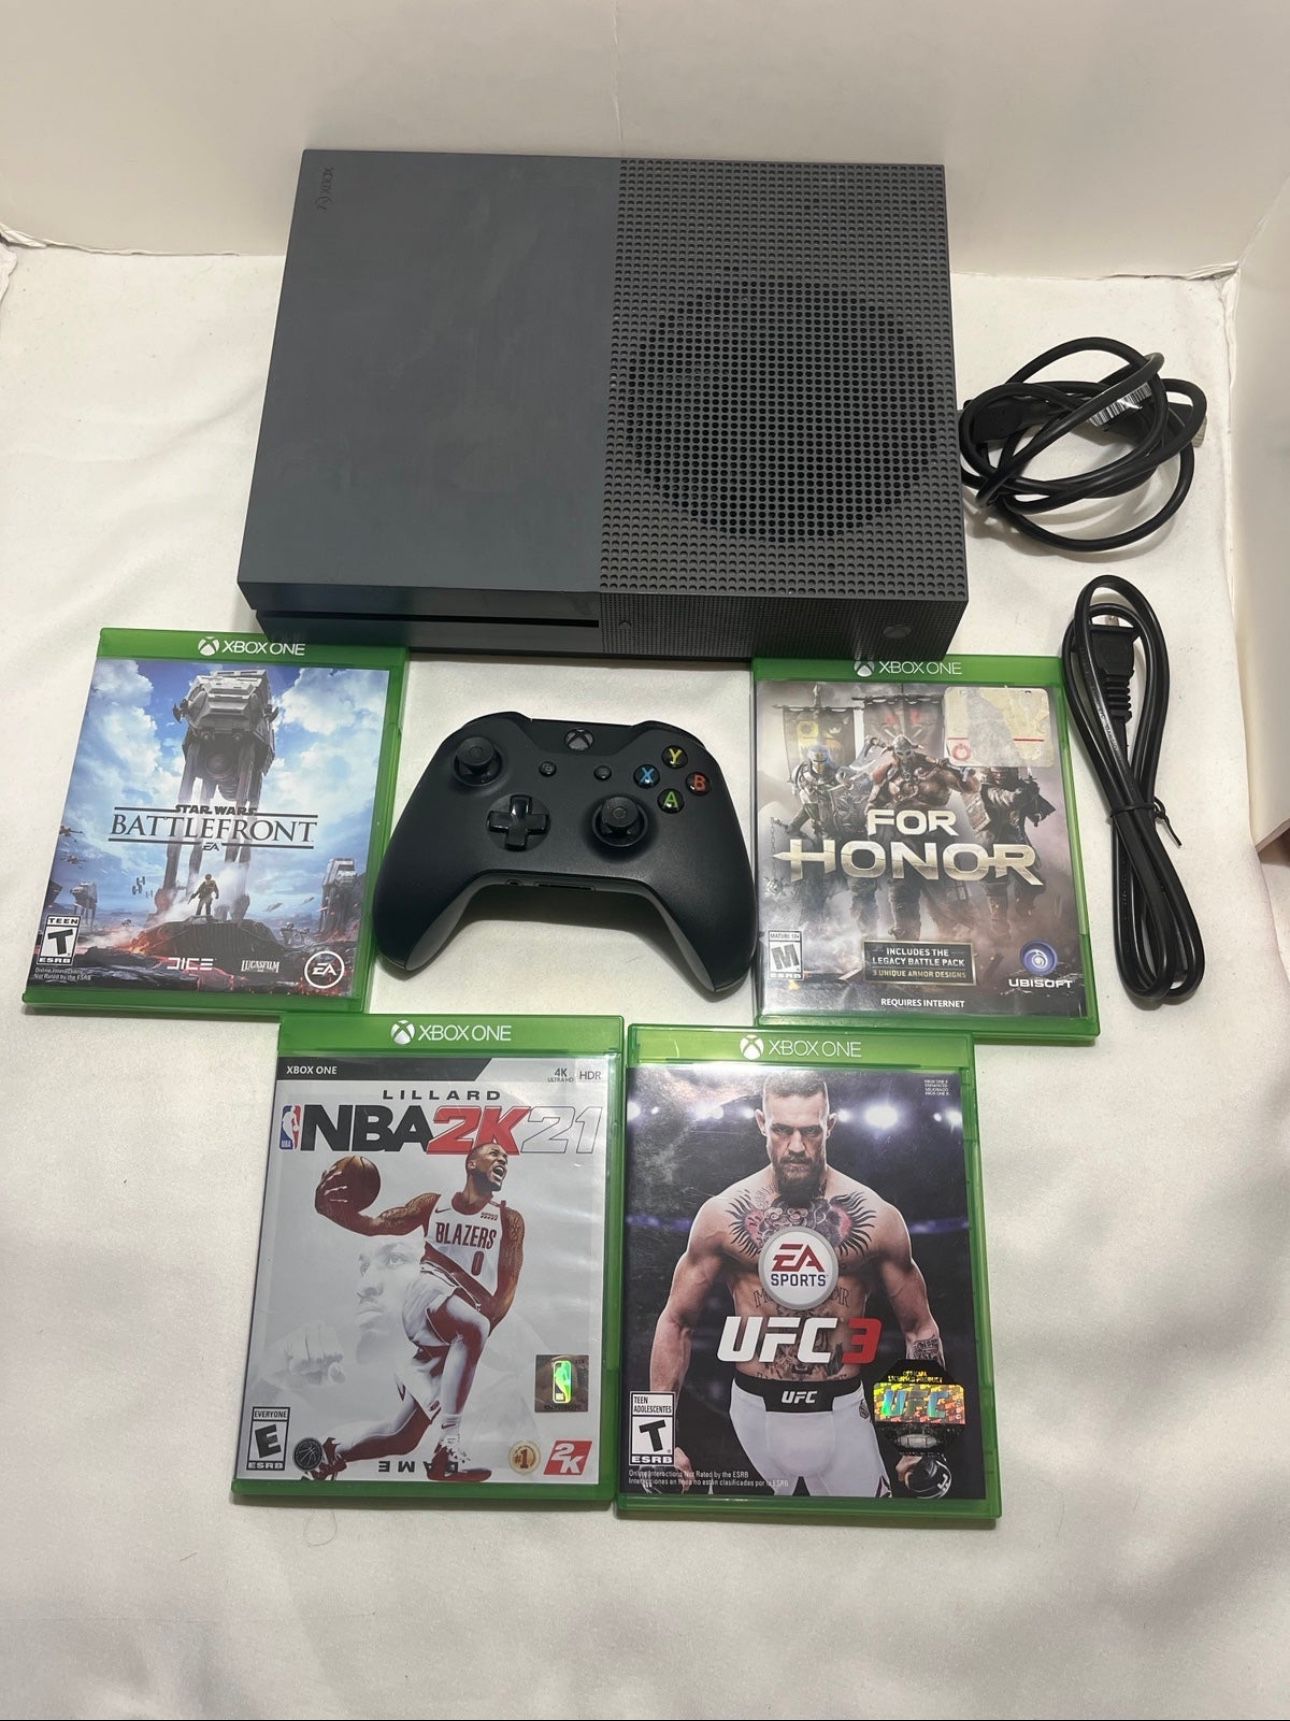 Microsoft Xbox One S Gray 500 GB Console, with games bundle